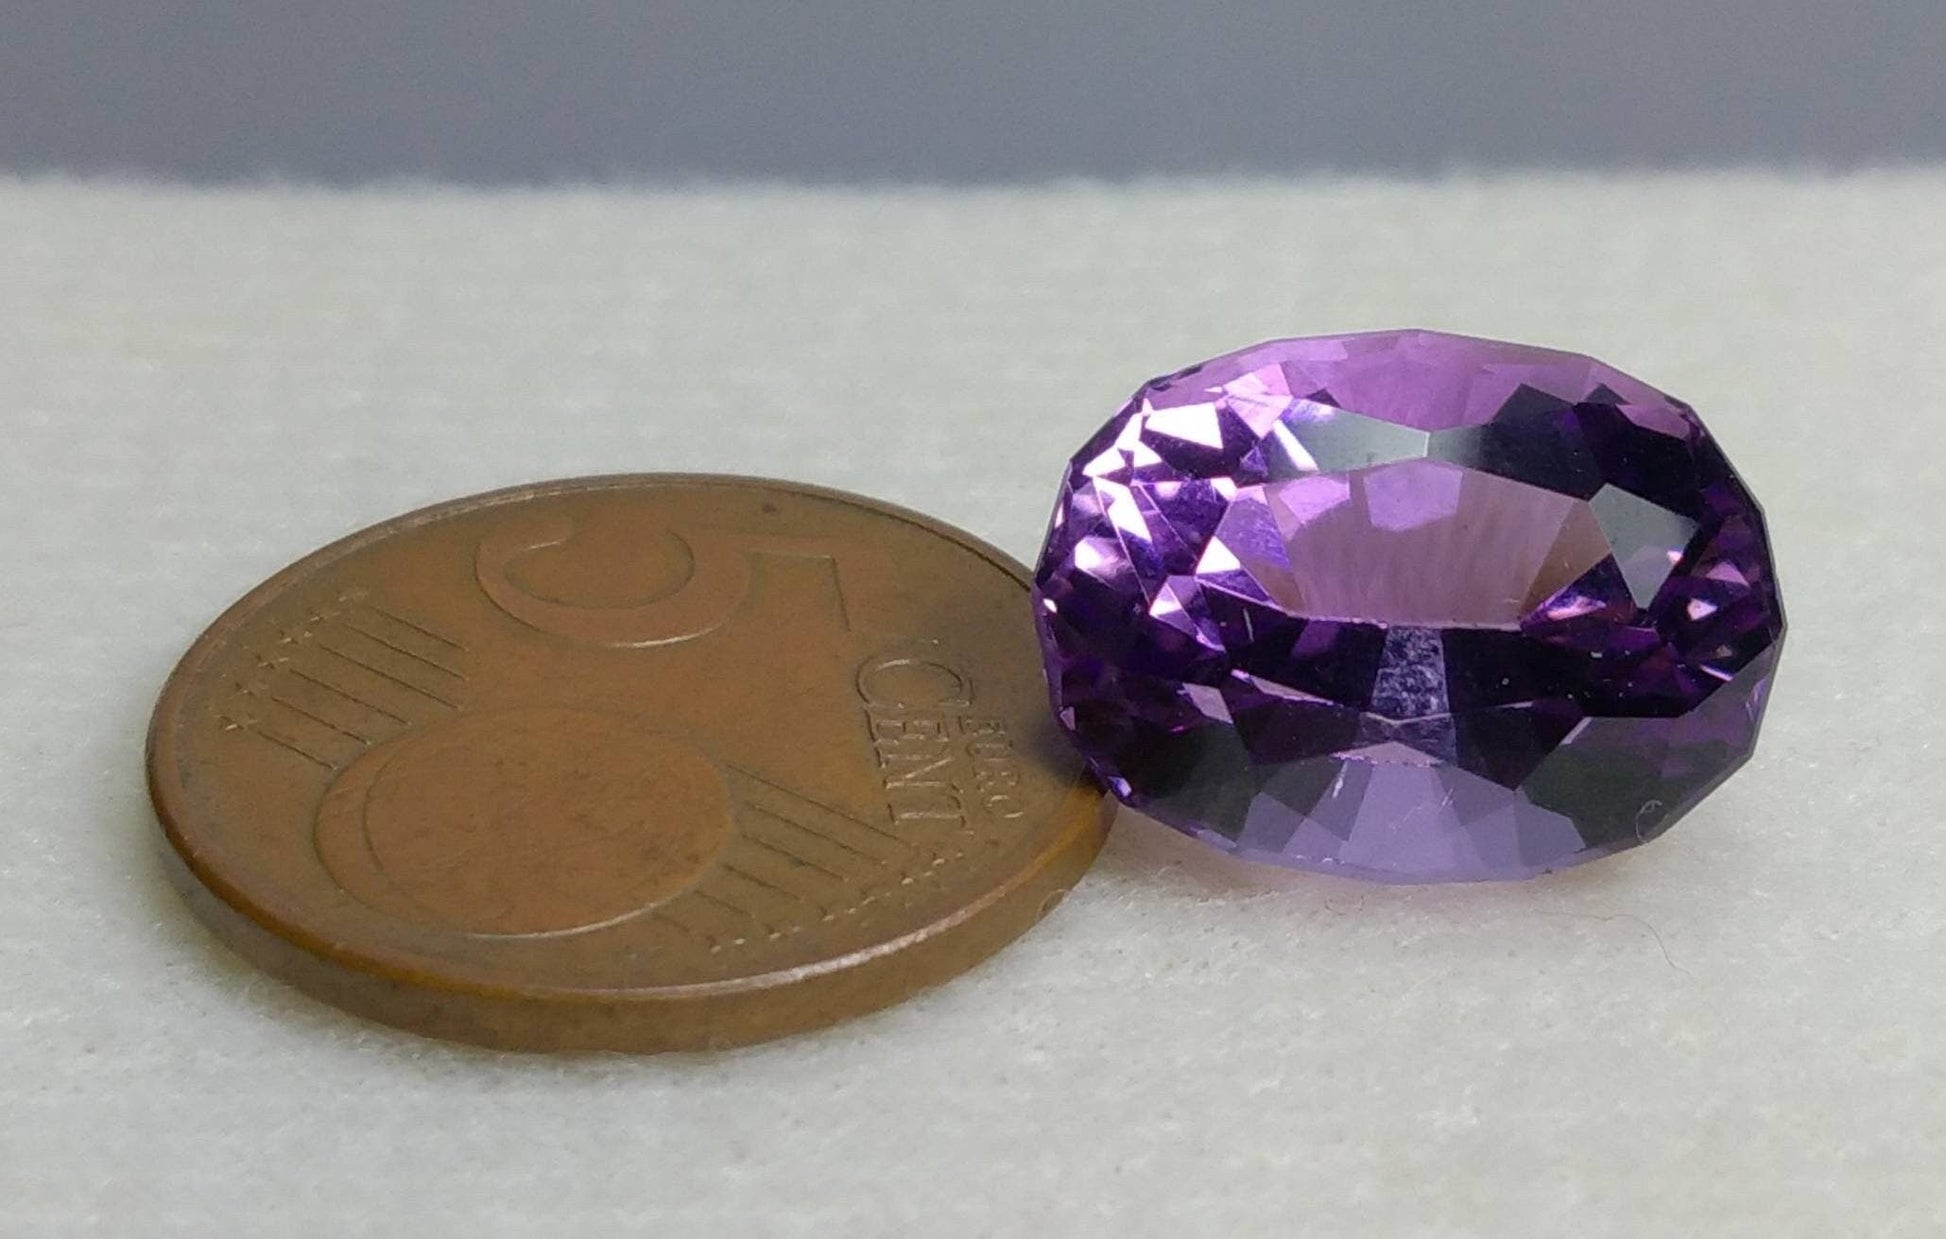 ARSAA GEMS AND MINERALSNatural top quality beautiful 11.5 carats deep purple color oval shape faceted amythest gem - Premium  from ARSAA GEMS AND MINERALS - Just $30.00! Shop now at ARSAA GEMS AND MINERALS